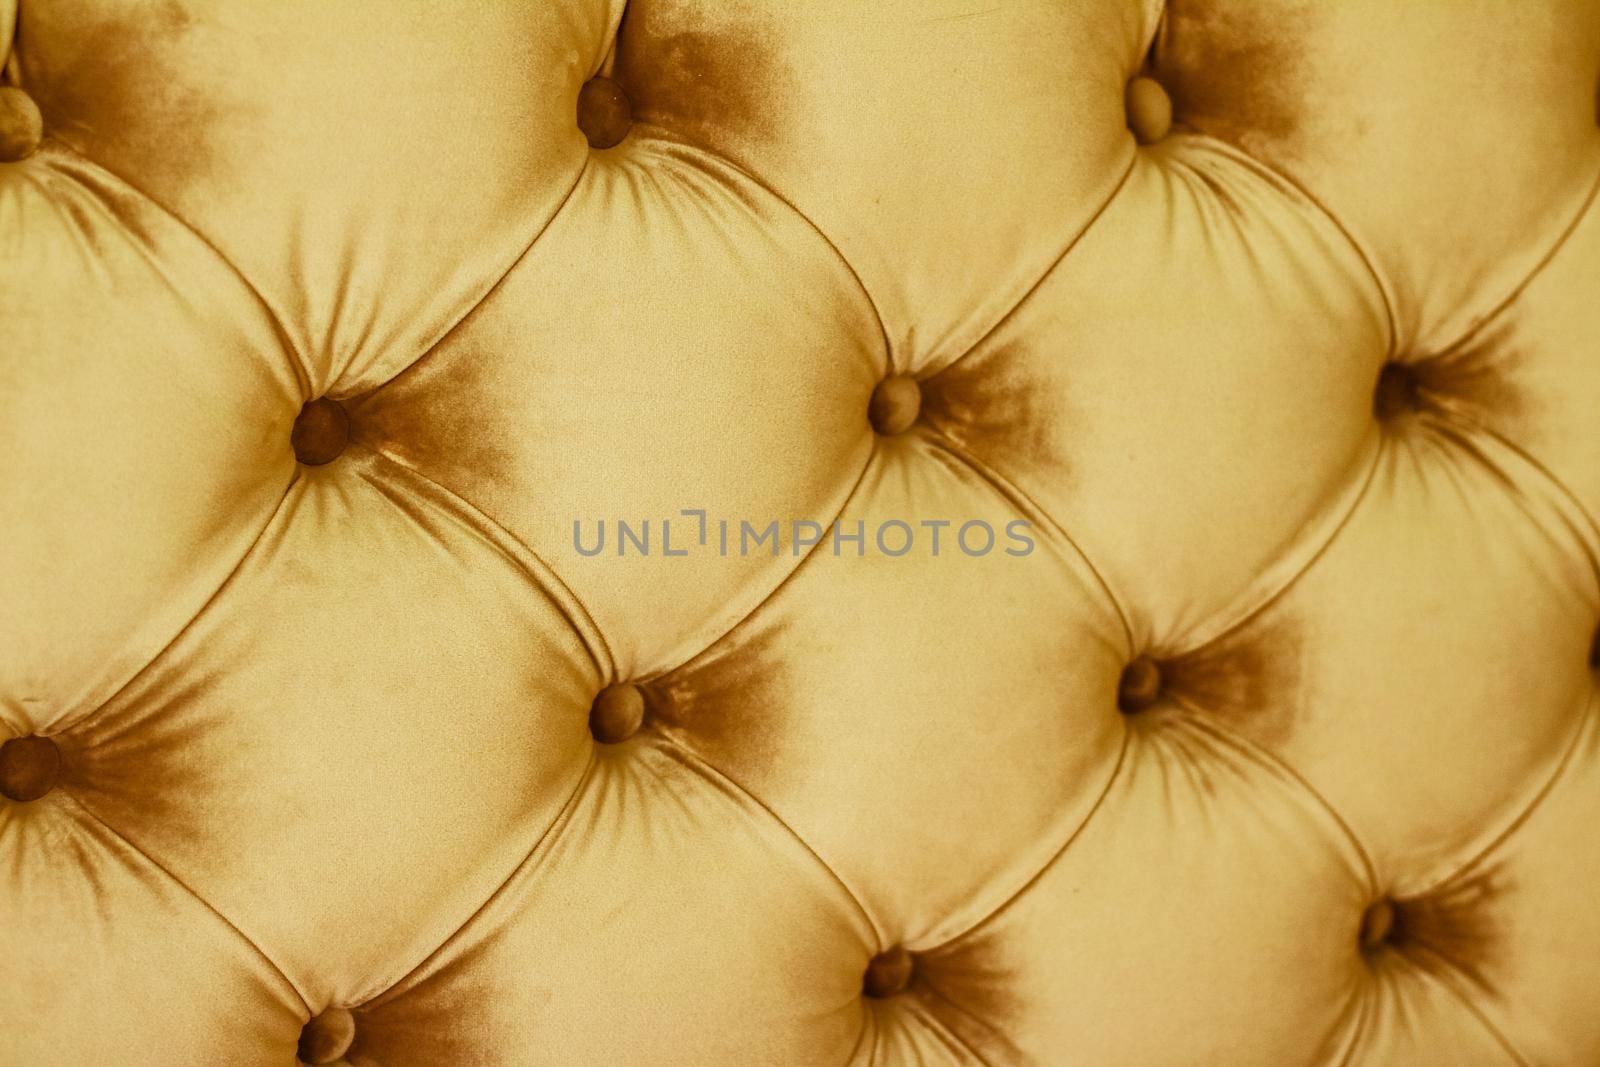 Furniture design, classic interior and royal vintage material concept - Golden luxury velour quilted sofa upholstery with buttons, elegant home decor texture and background